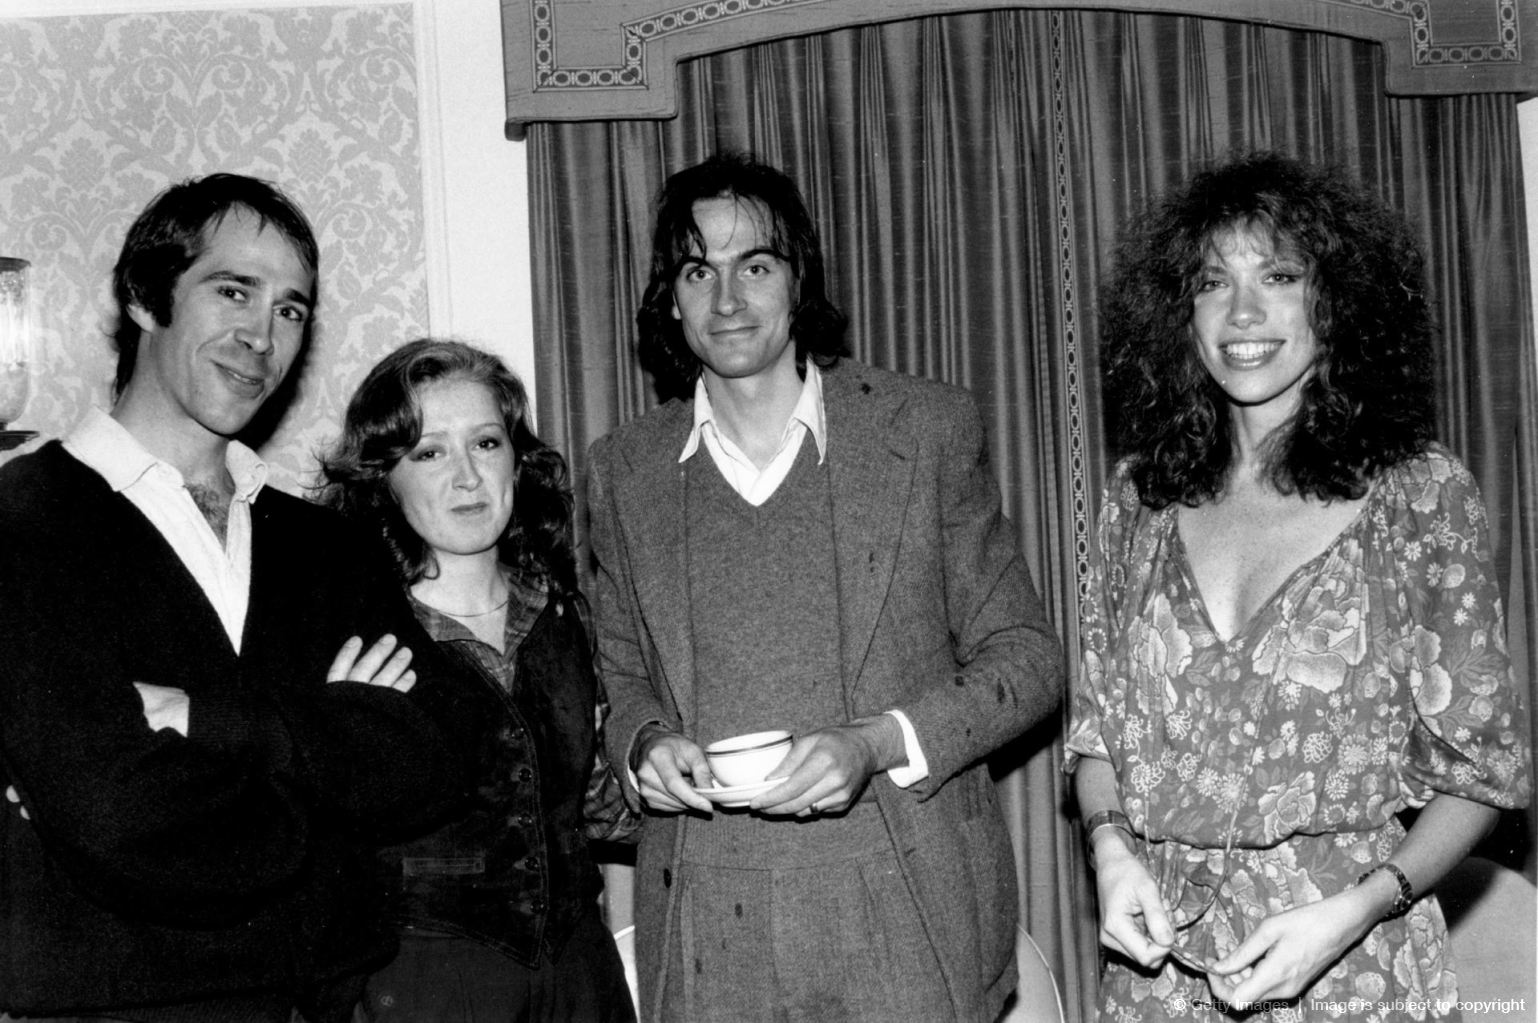 Musician and politician John Hall of the group 'Orleans', with singer/songwriters Bonnie Raitt, James Taylor and Carly Simon pose for a portrait backstage in circa 1980 © Robin Platzer /Getty Images